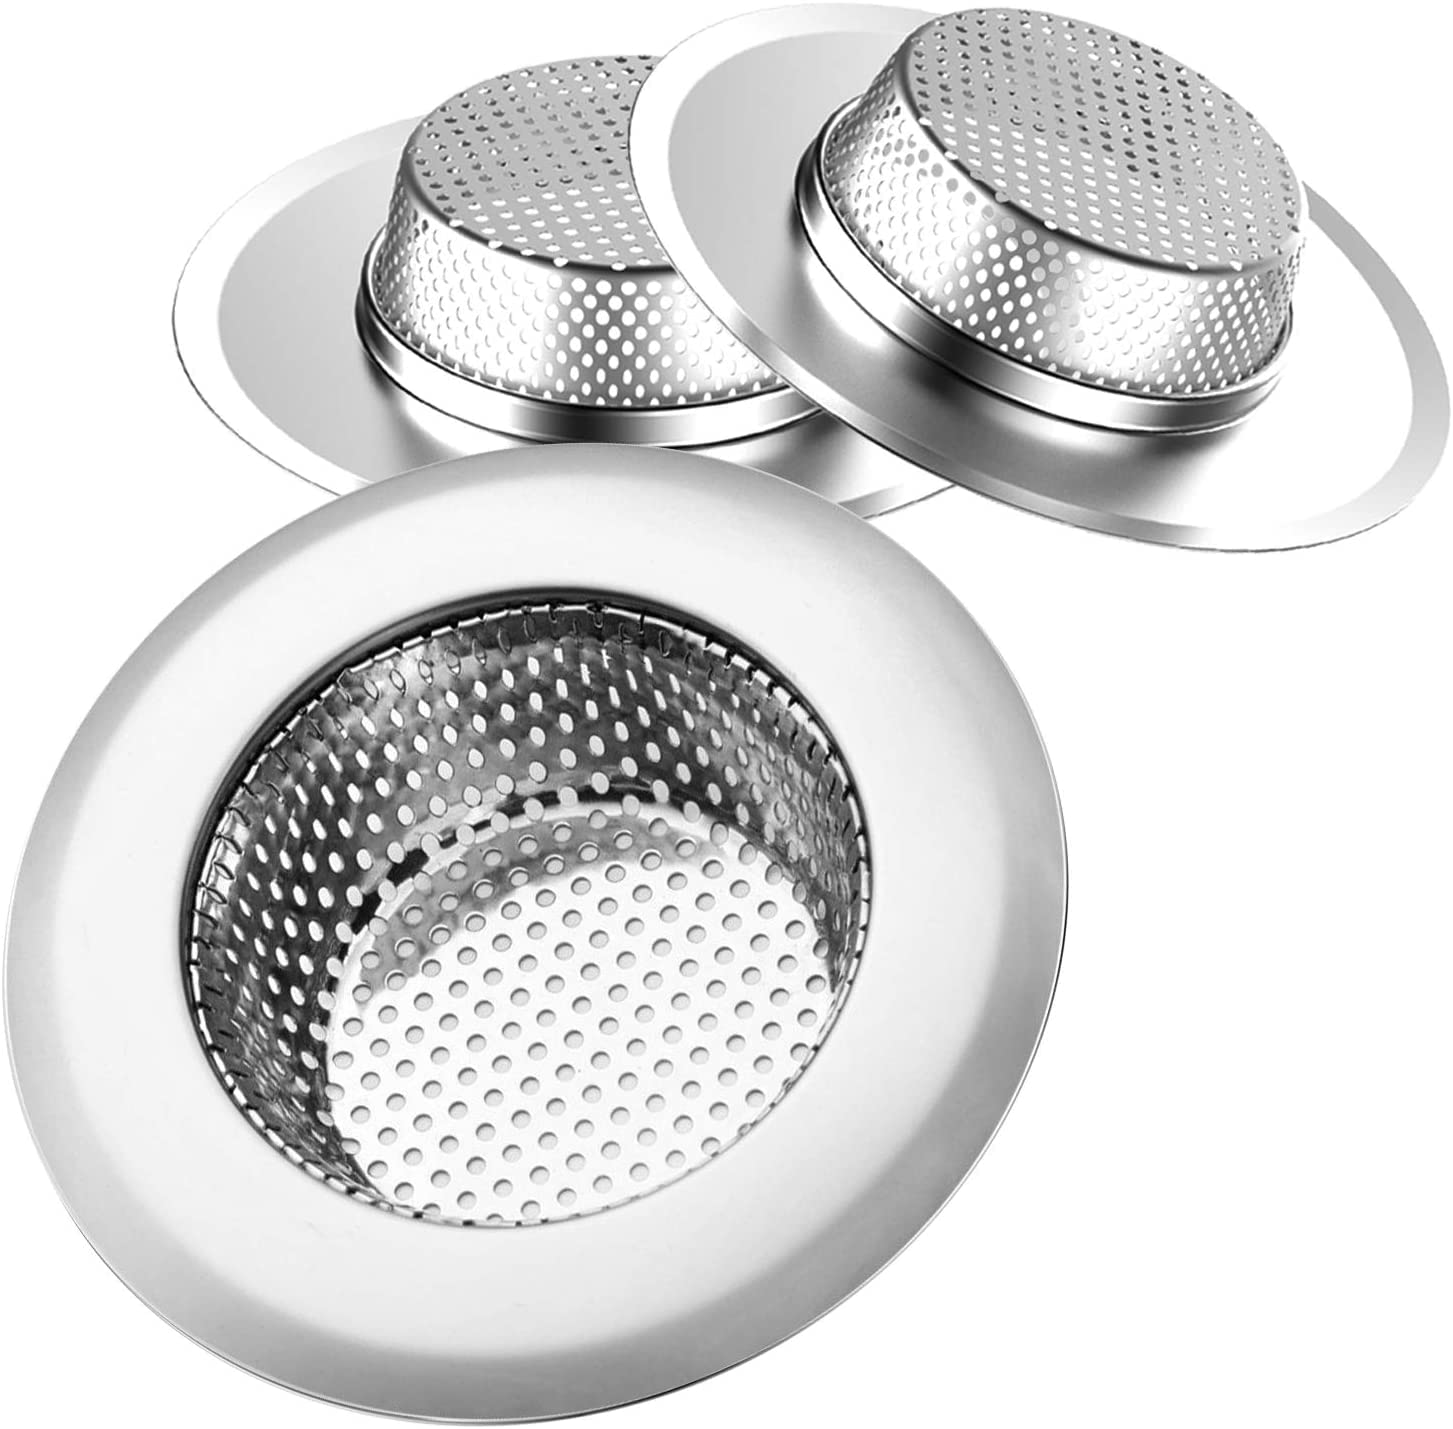 Helect 3-Pack Kitchen Sink Strainer Stainless Steel Drain Filter Strainer with Large Wide Rim 4.5